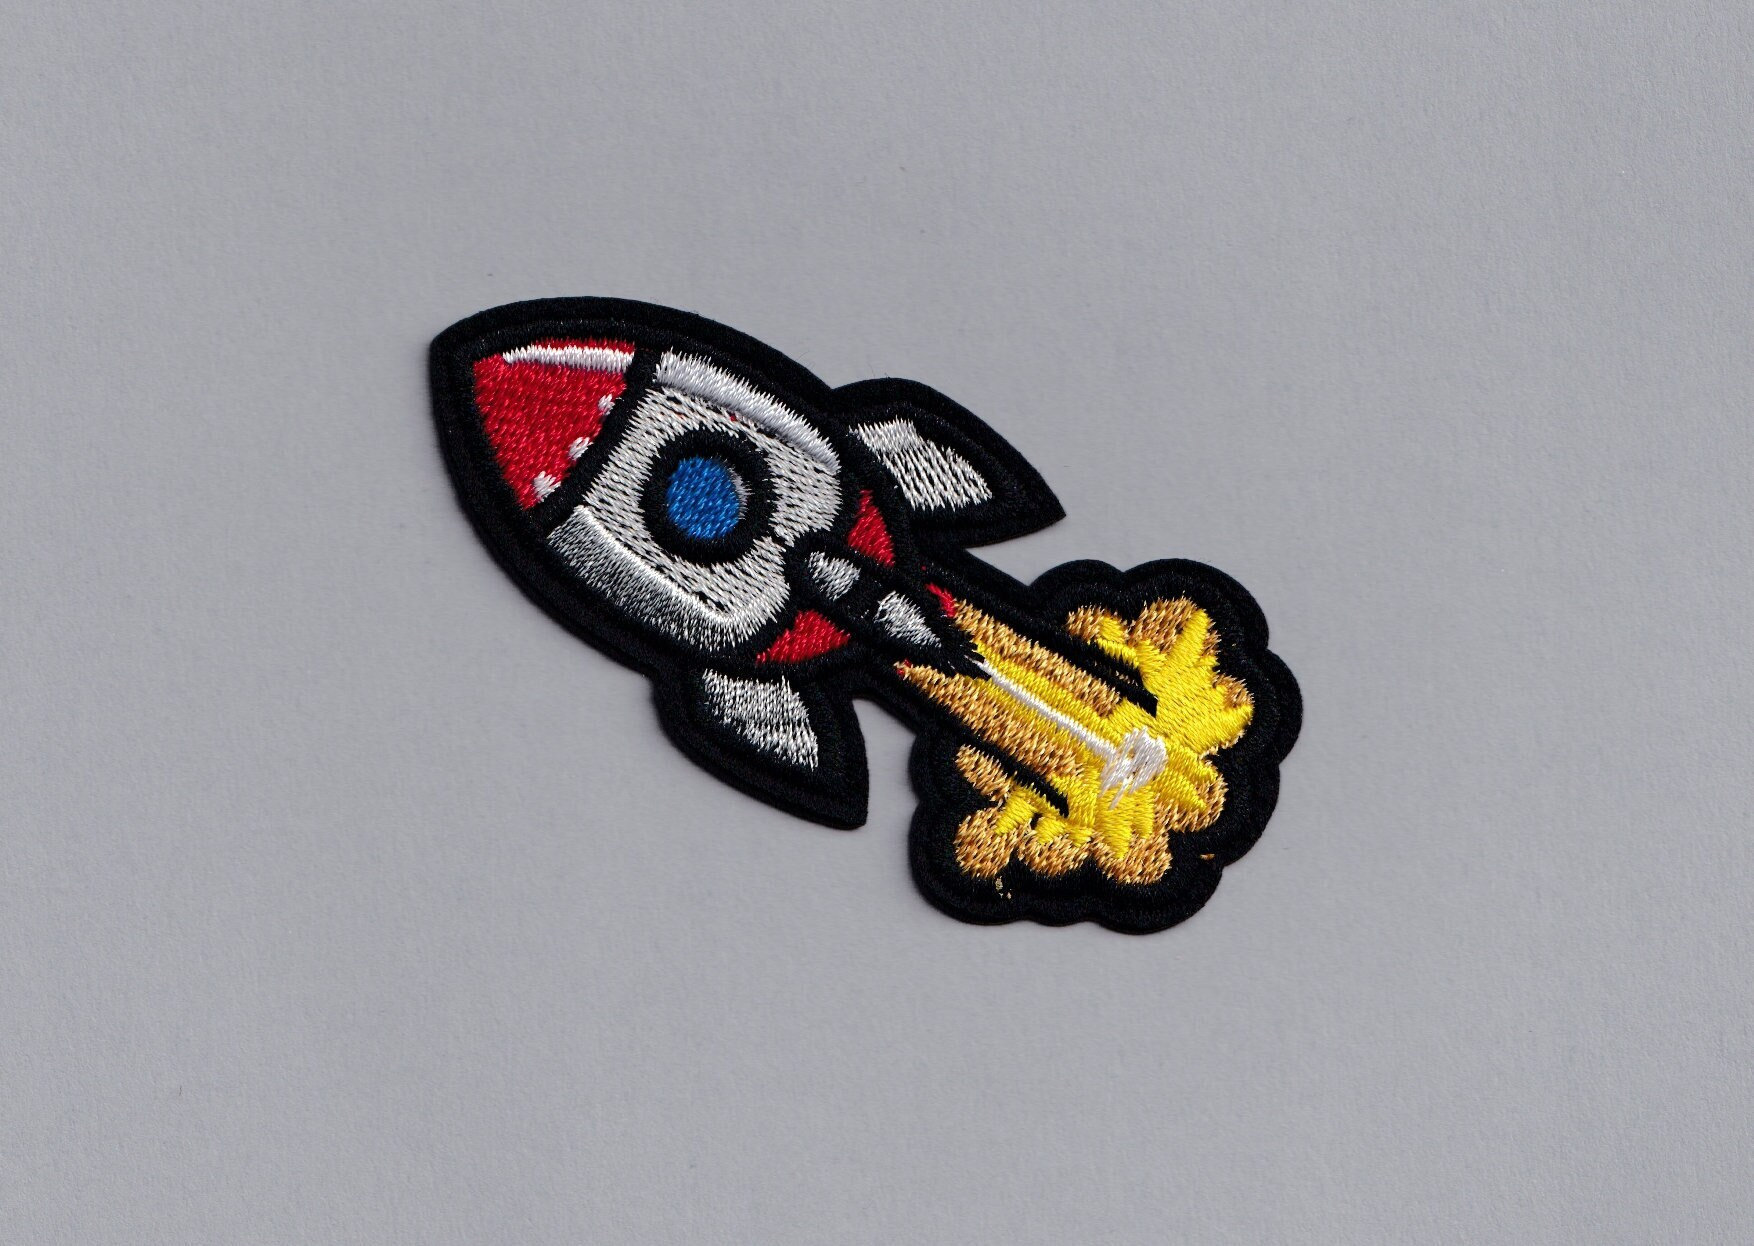 Rocket Popsicle Iron on Patch, Applique Sew on Patch, Patches for Hats,  Embroidered Backpack Patch, Fourth of July Gift, Red White and Blue 